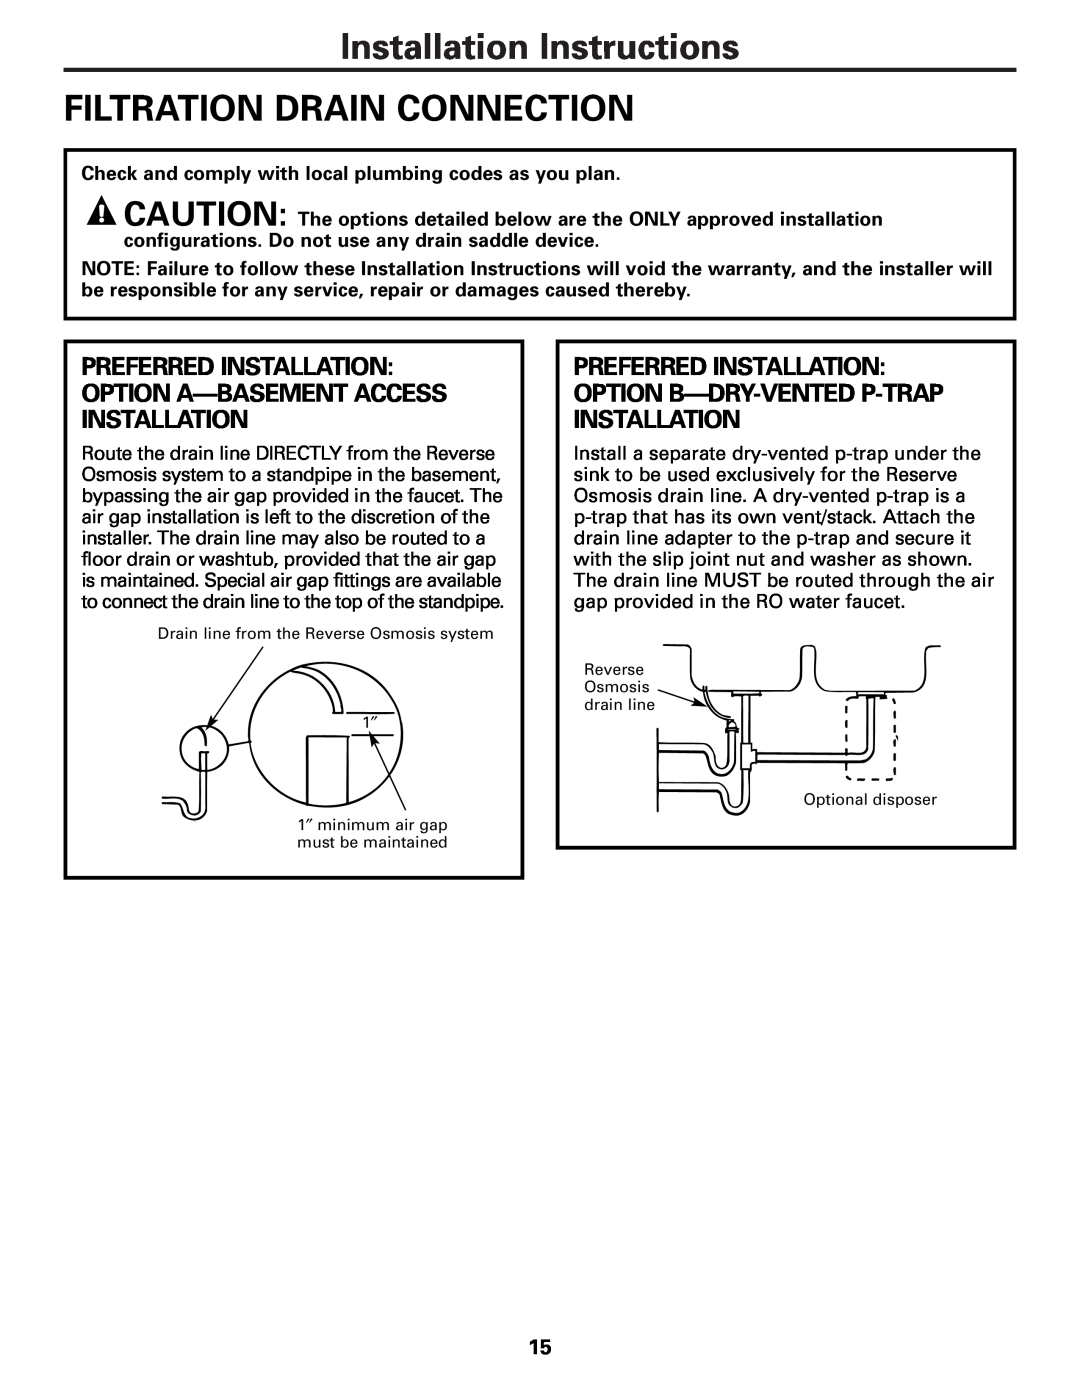 GE PXRQ15F Installation Instructions FILTRATION DRAIN CONNECTION, Check and comply with local plumbing codes as you plan 